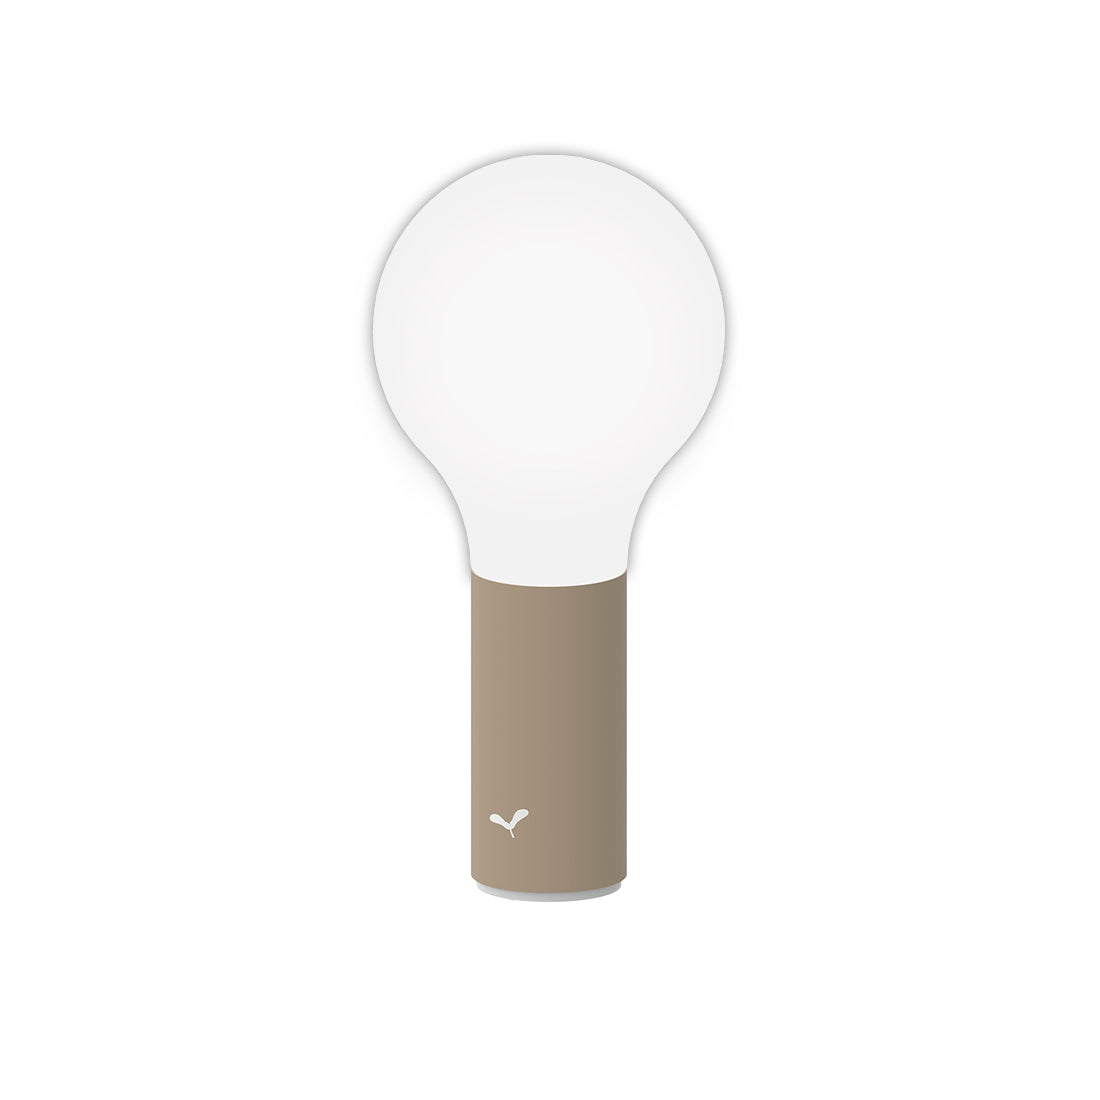 Fermob Aplô portable indoor and outdoor Lamp in Nutmeg in front of a white background.